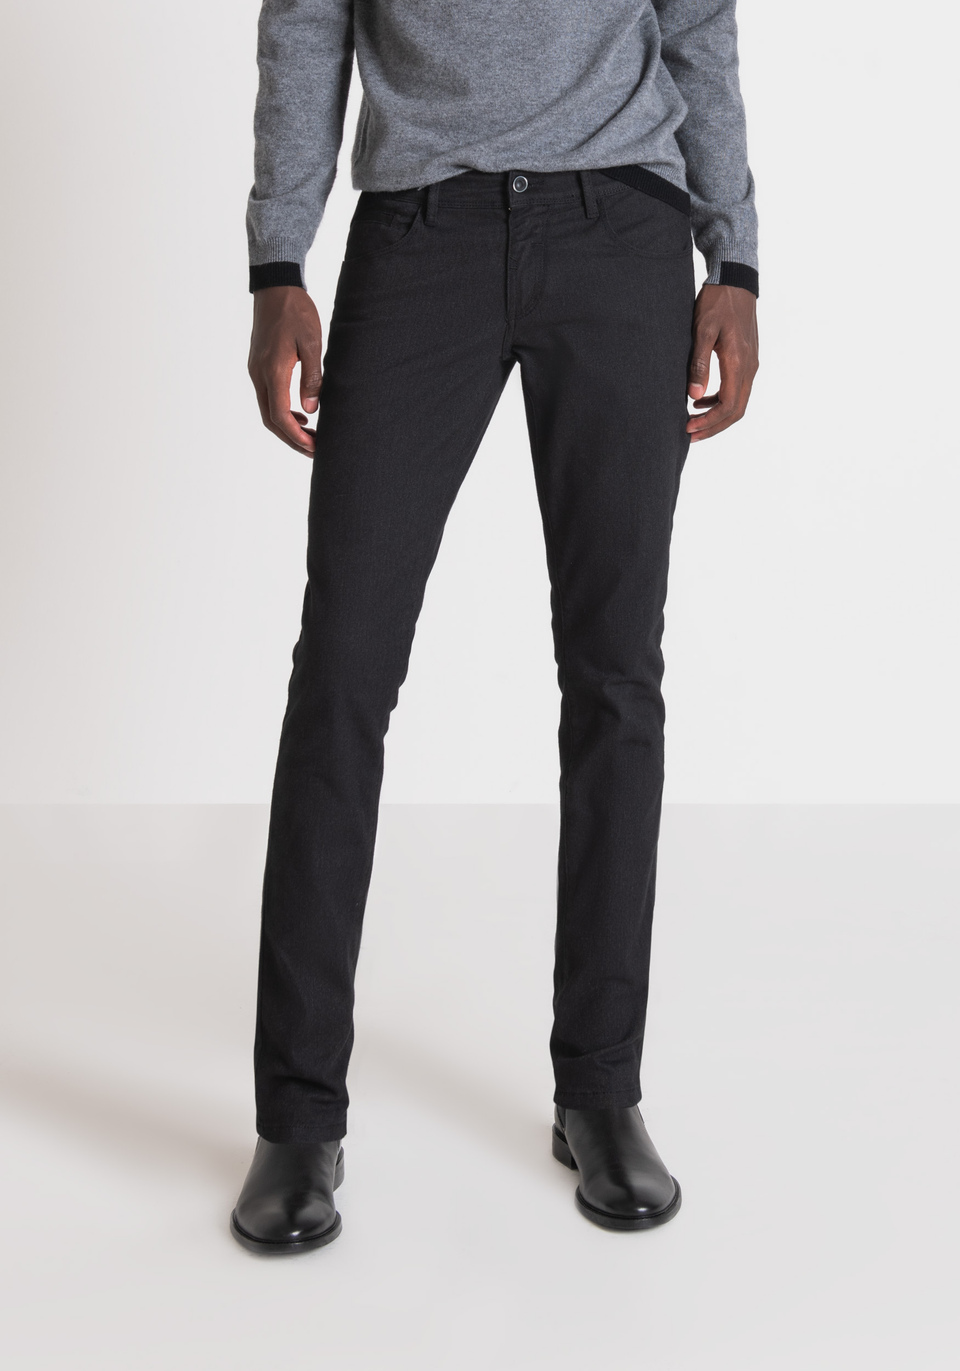 SKINNY-FIT “MARLON” TROUSERS MADE OF STRETCH COTTON TWILL - Antony Morato Online Shop